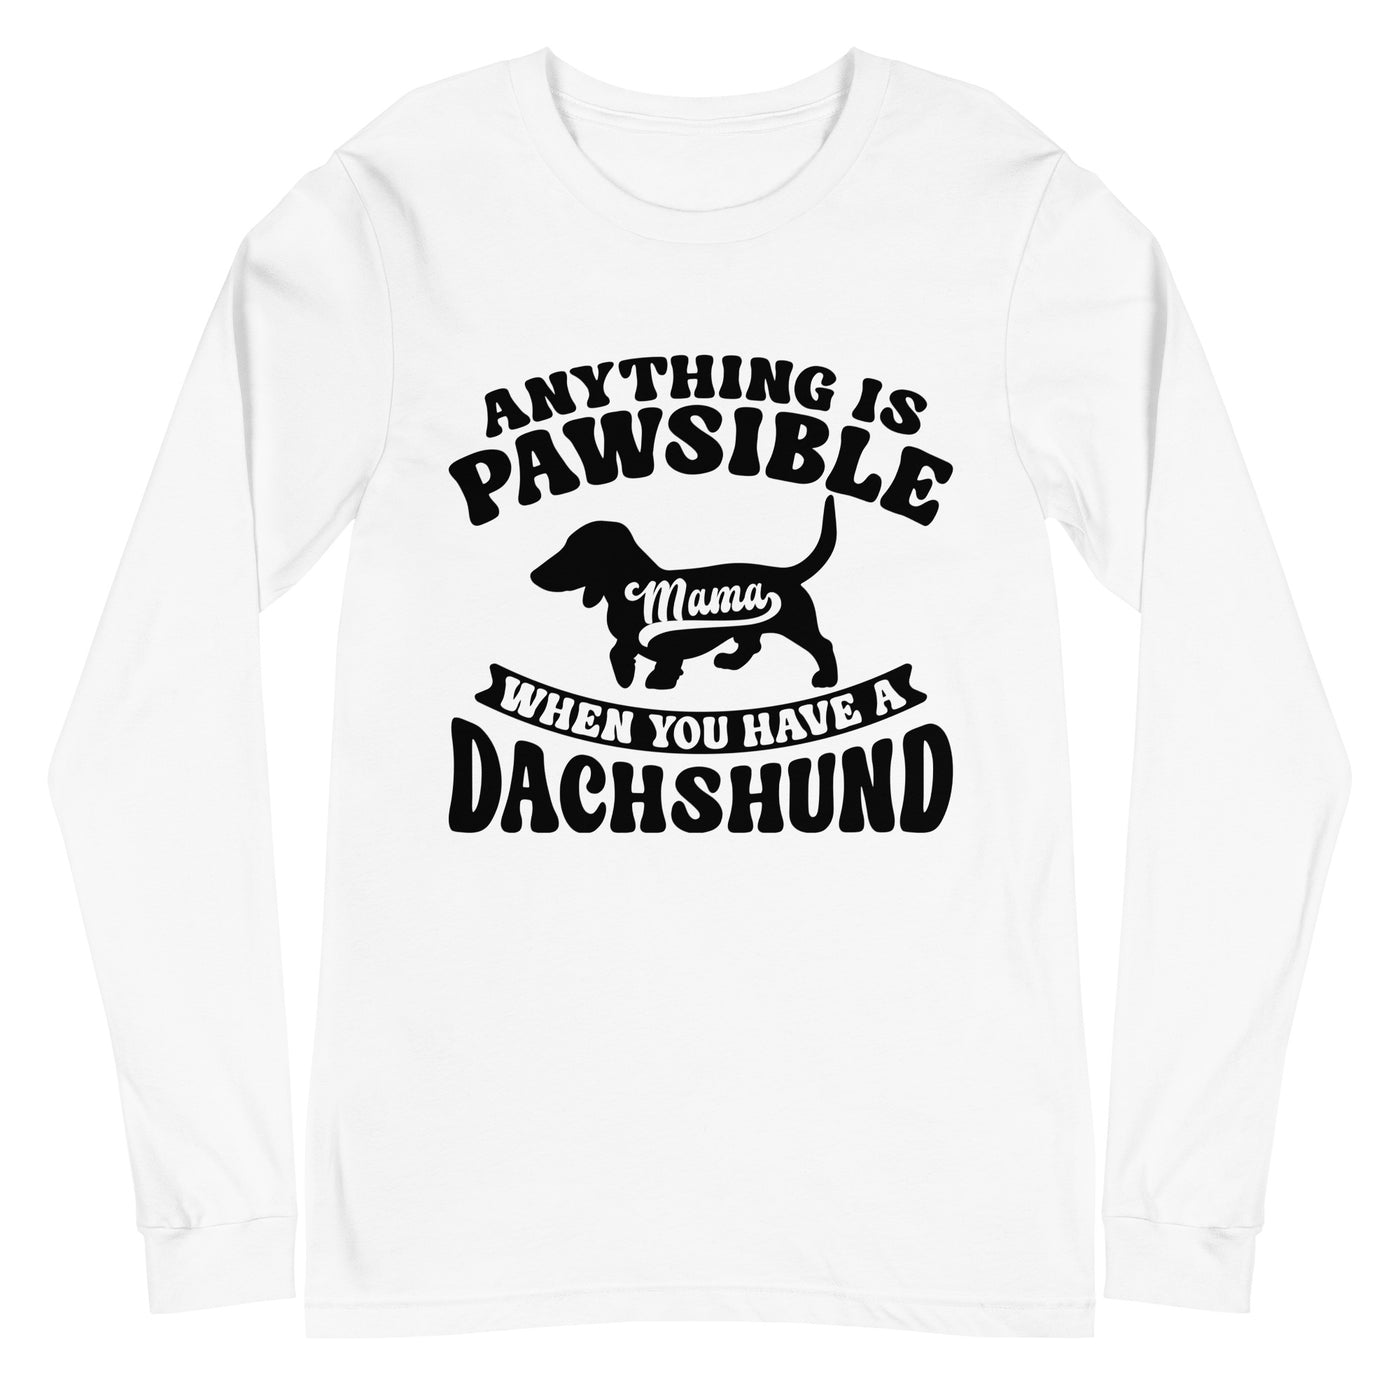 Anything Is Pawsible Long Sleeves